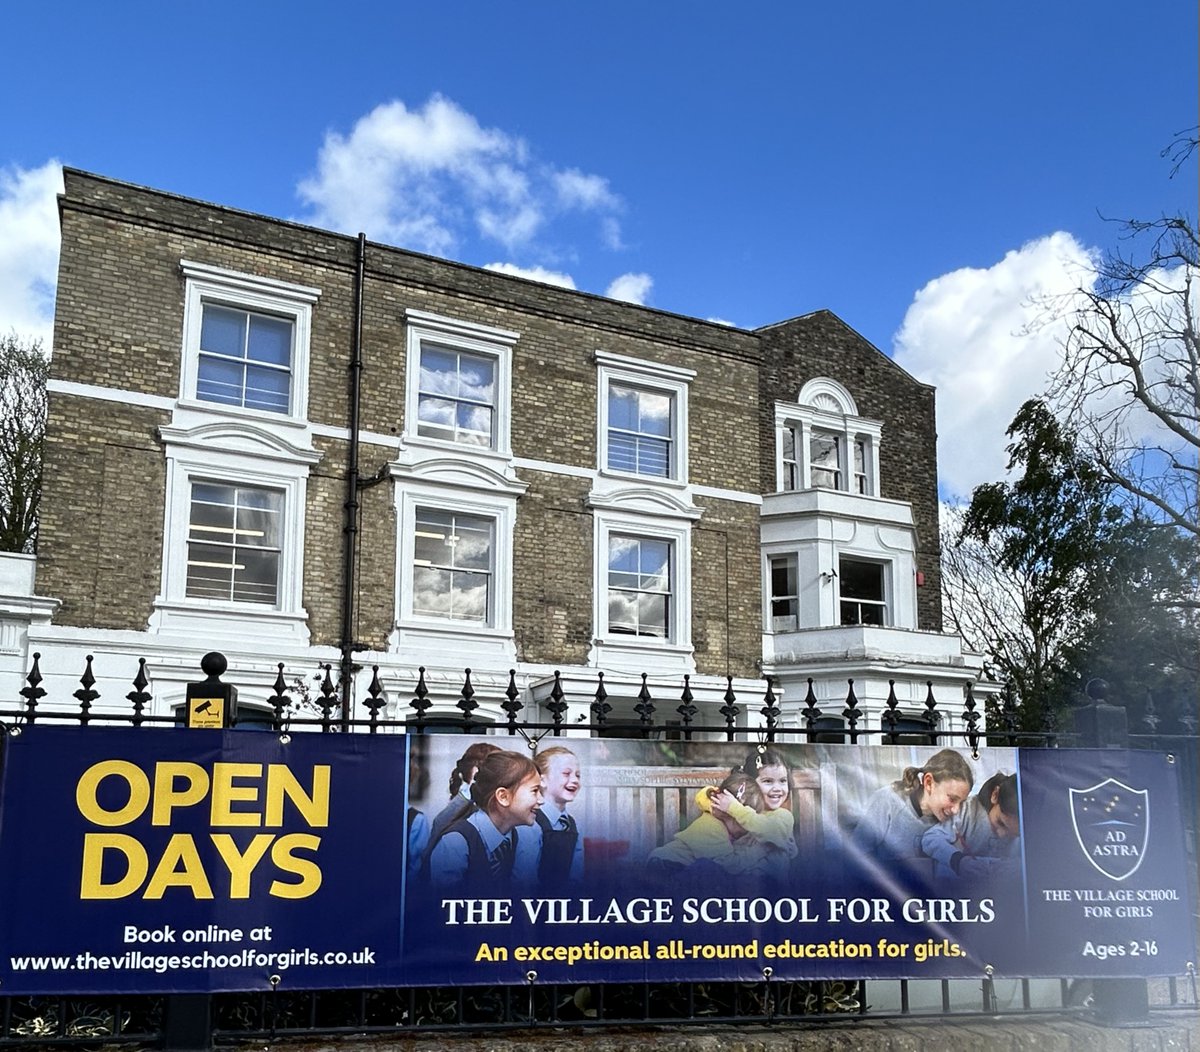 To find out what makes The Village truly special, visit  
thevillageschoolforgirls.co.uk to book on to one of our upcoming Open Days.

⭐️ First up... Wednesday, 8th May at 9:30am.⭐️

We very much look forward to welcoming you!
#OpenDays #BelsizePark #VillagePrep #Hampstead